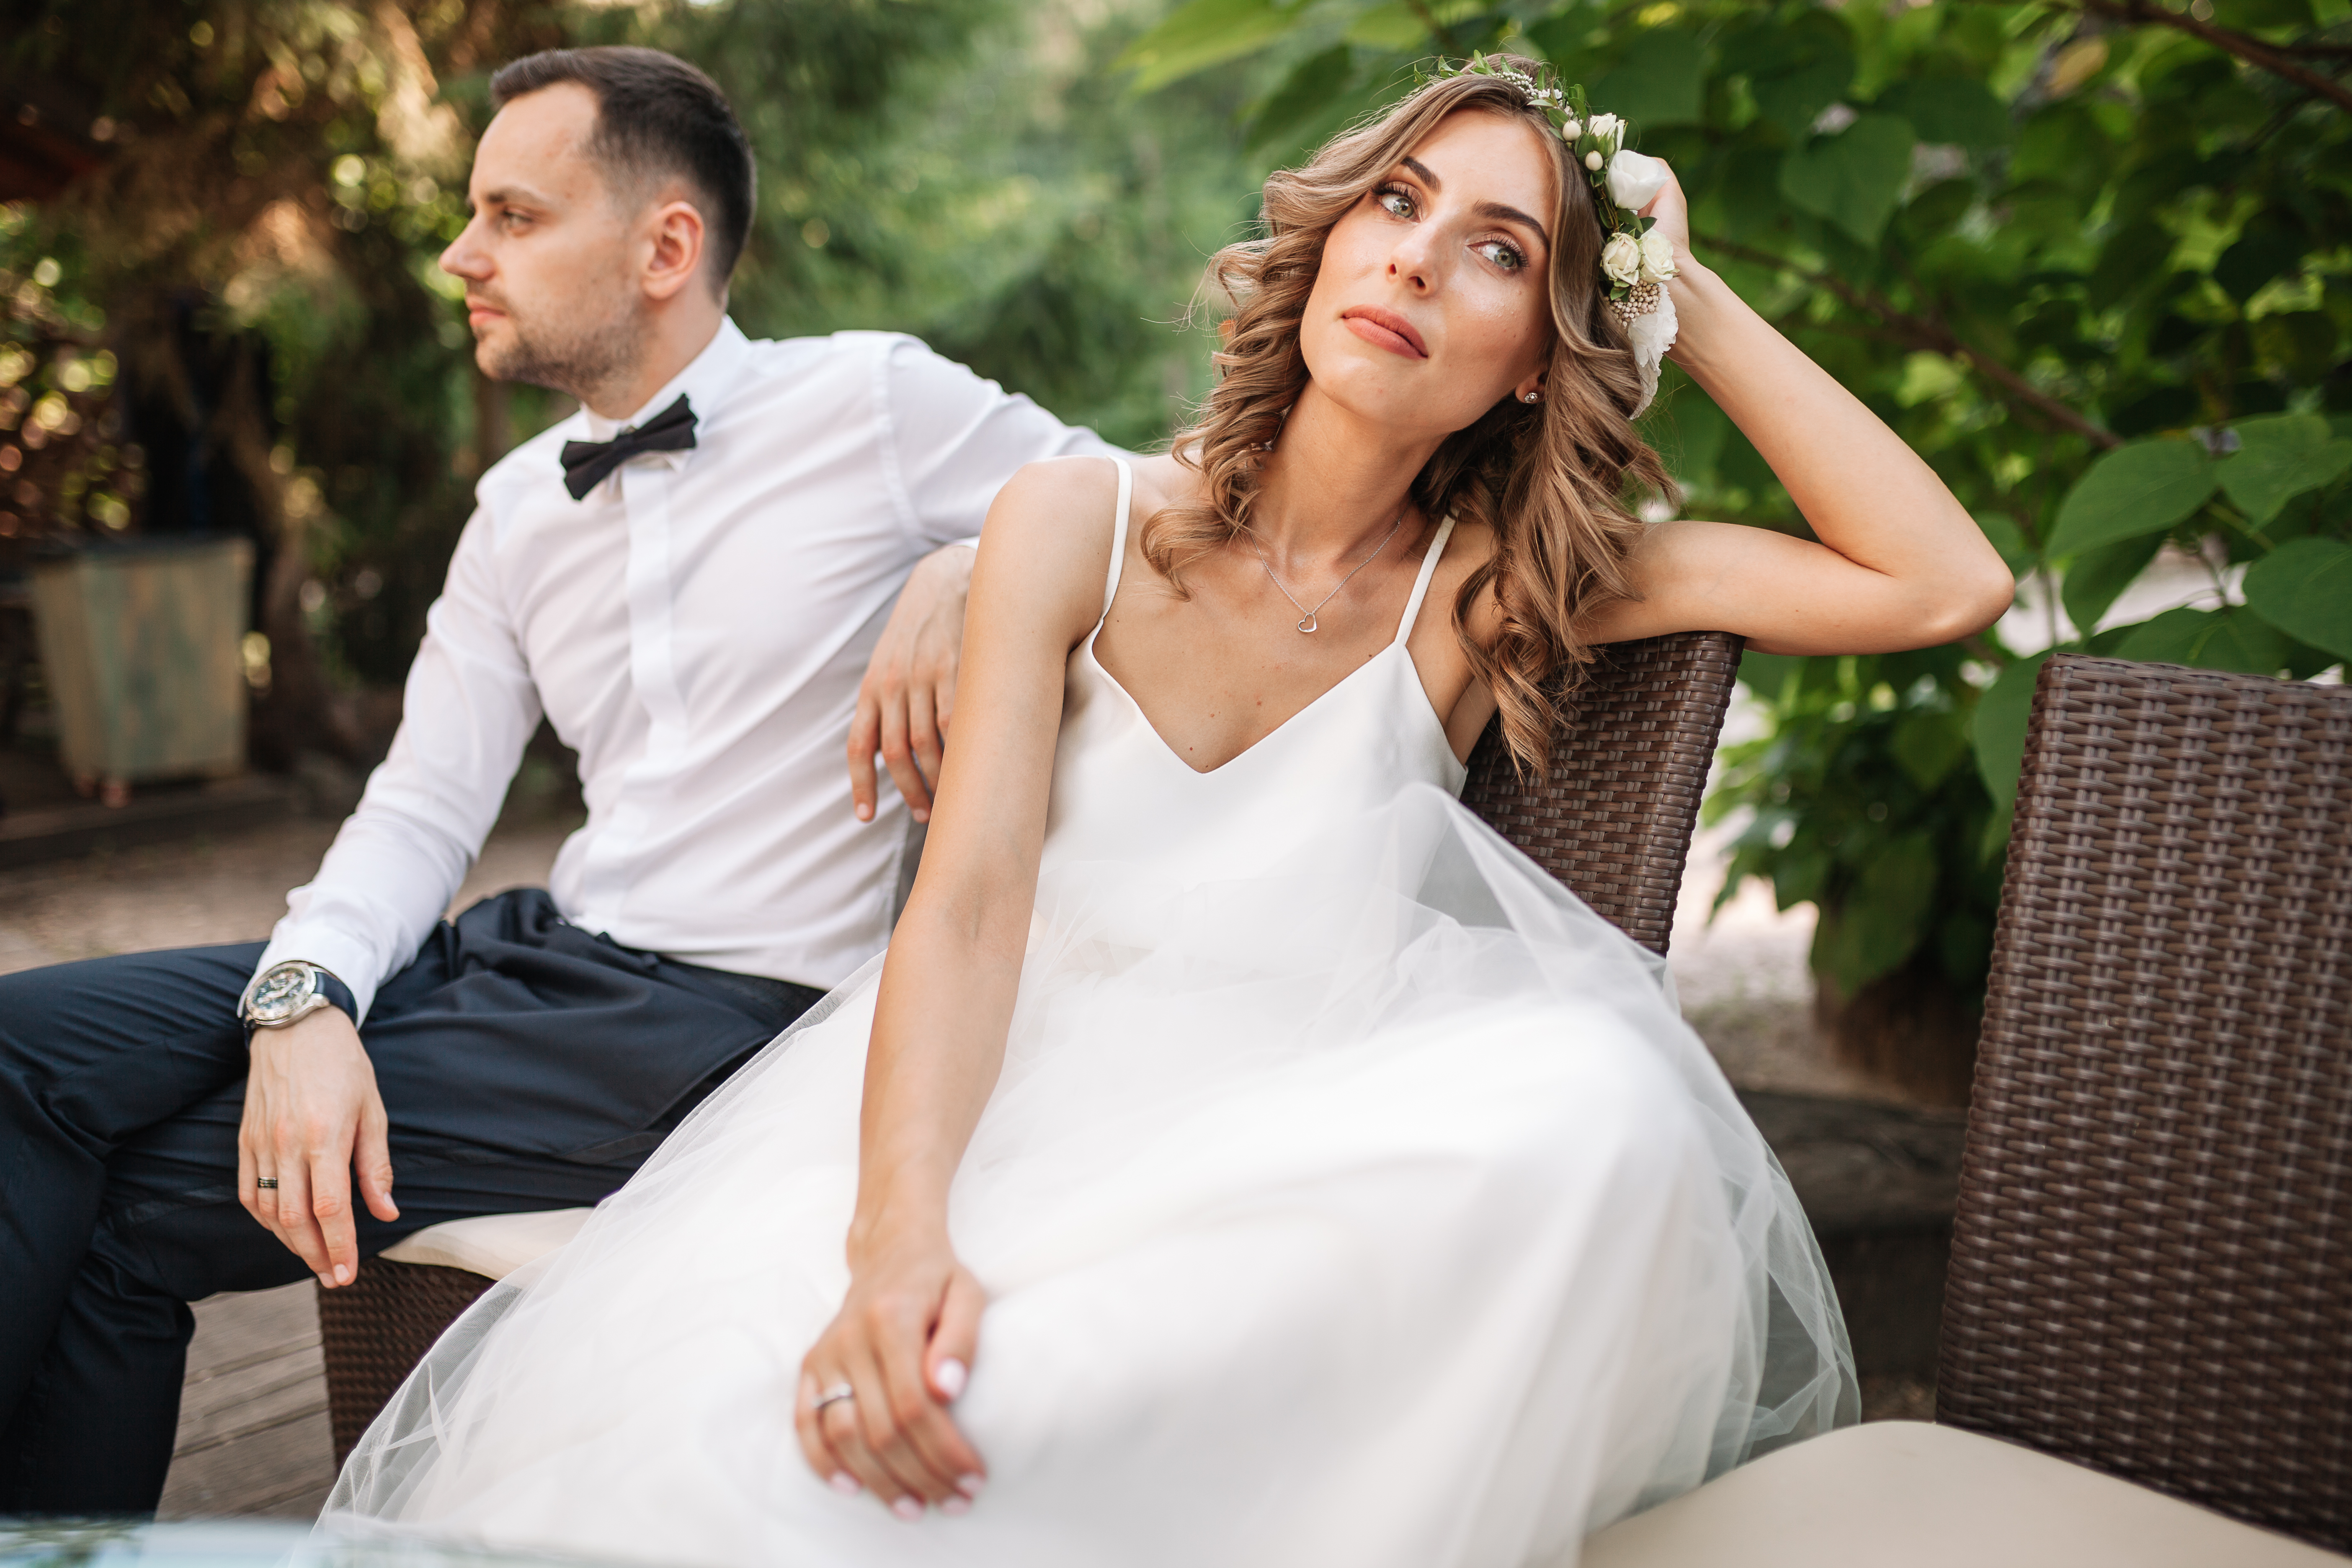 A bride and groom seated at a bench, both looking away from each other | Source: Shutterstock